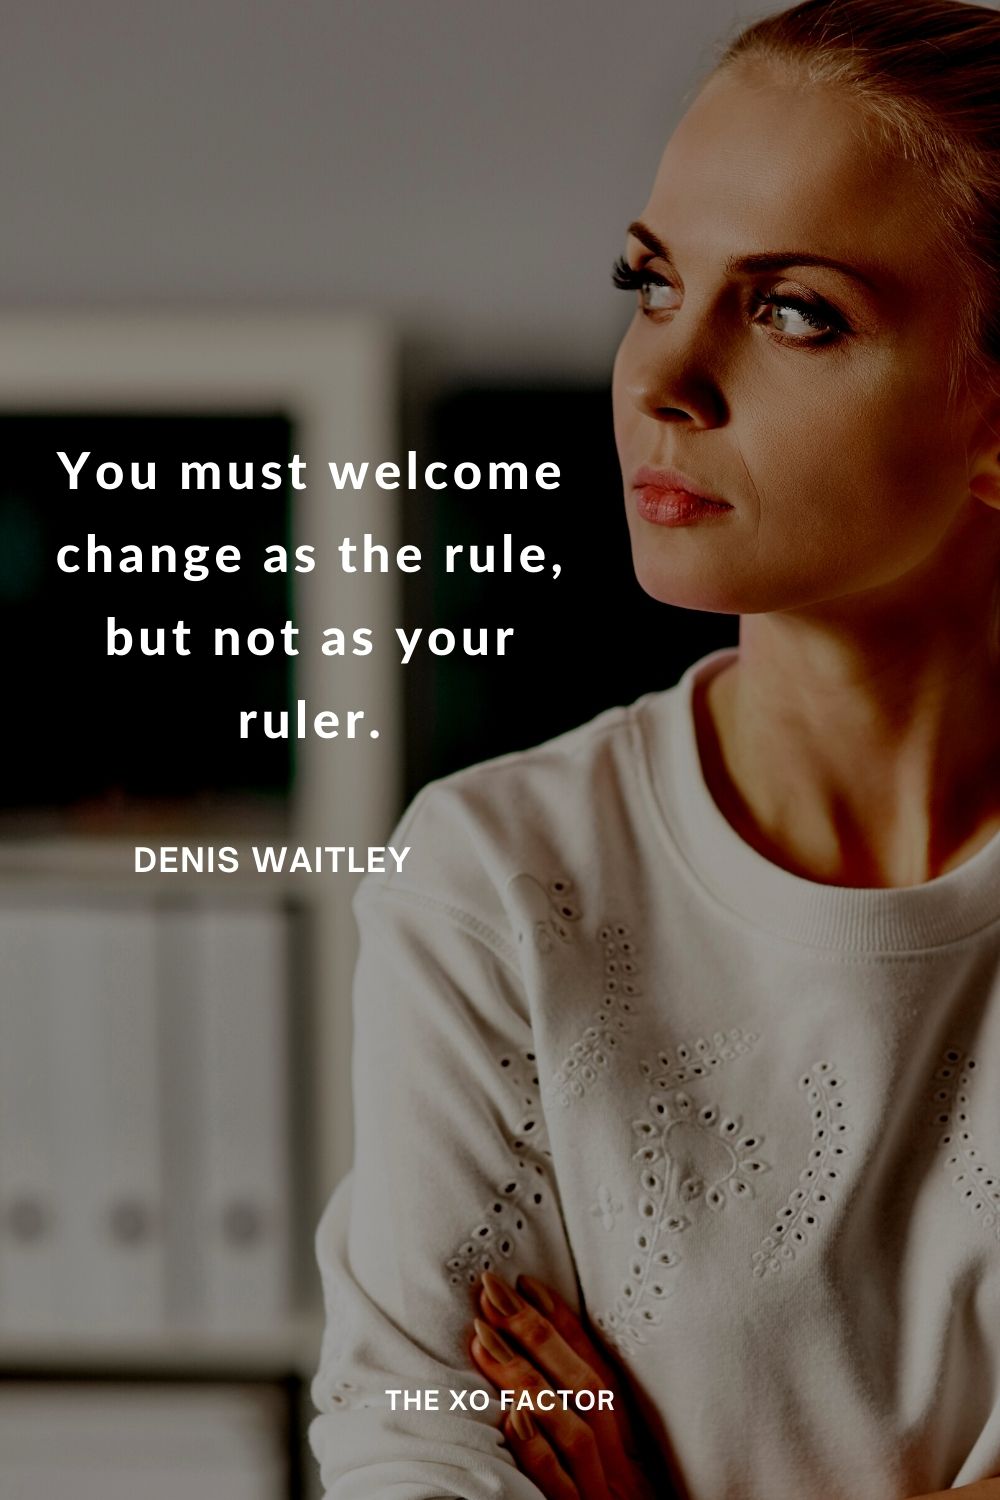 You must welcome change as the rule, but not as your ruler.